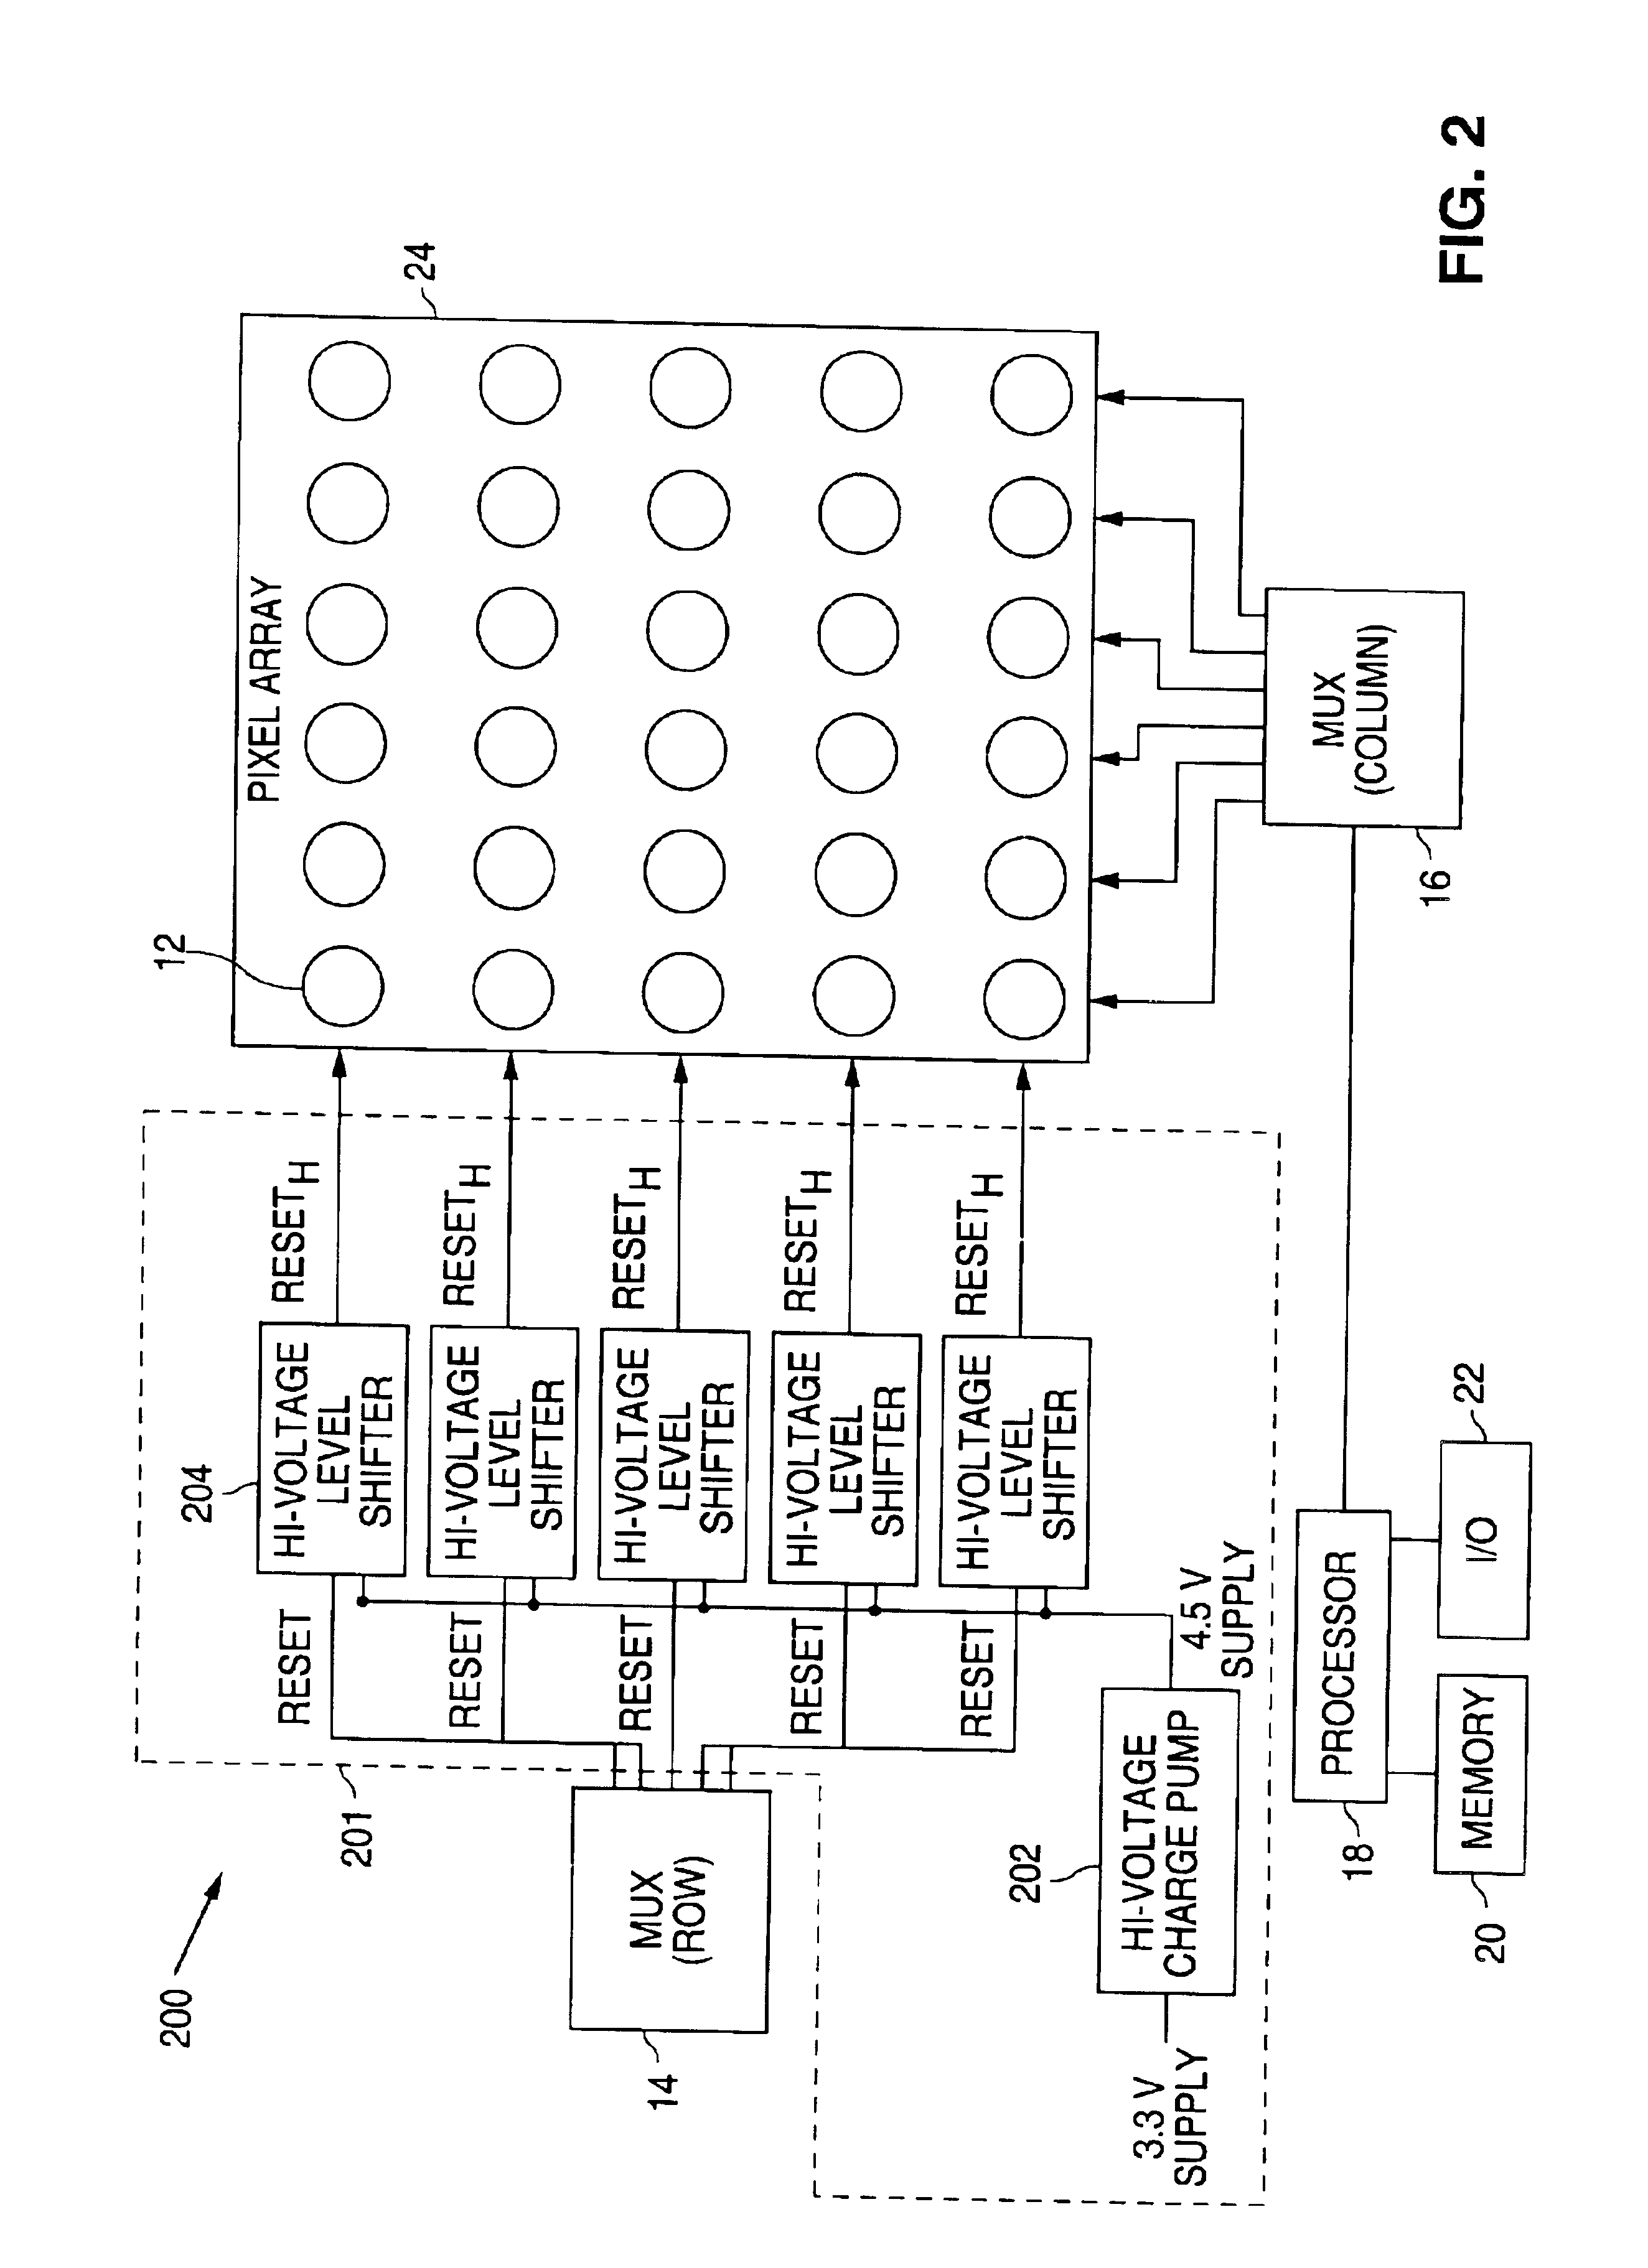 Blooming control for a CMOS image sensor